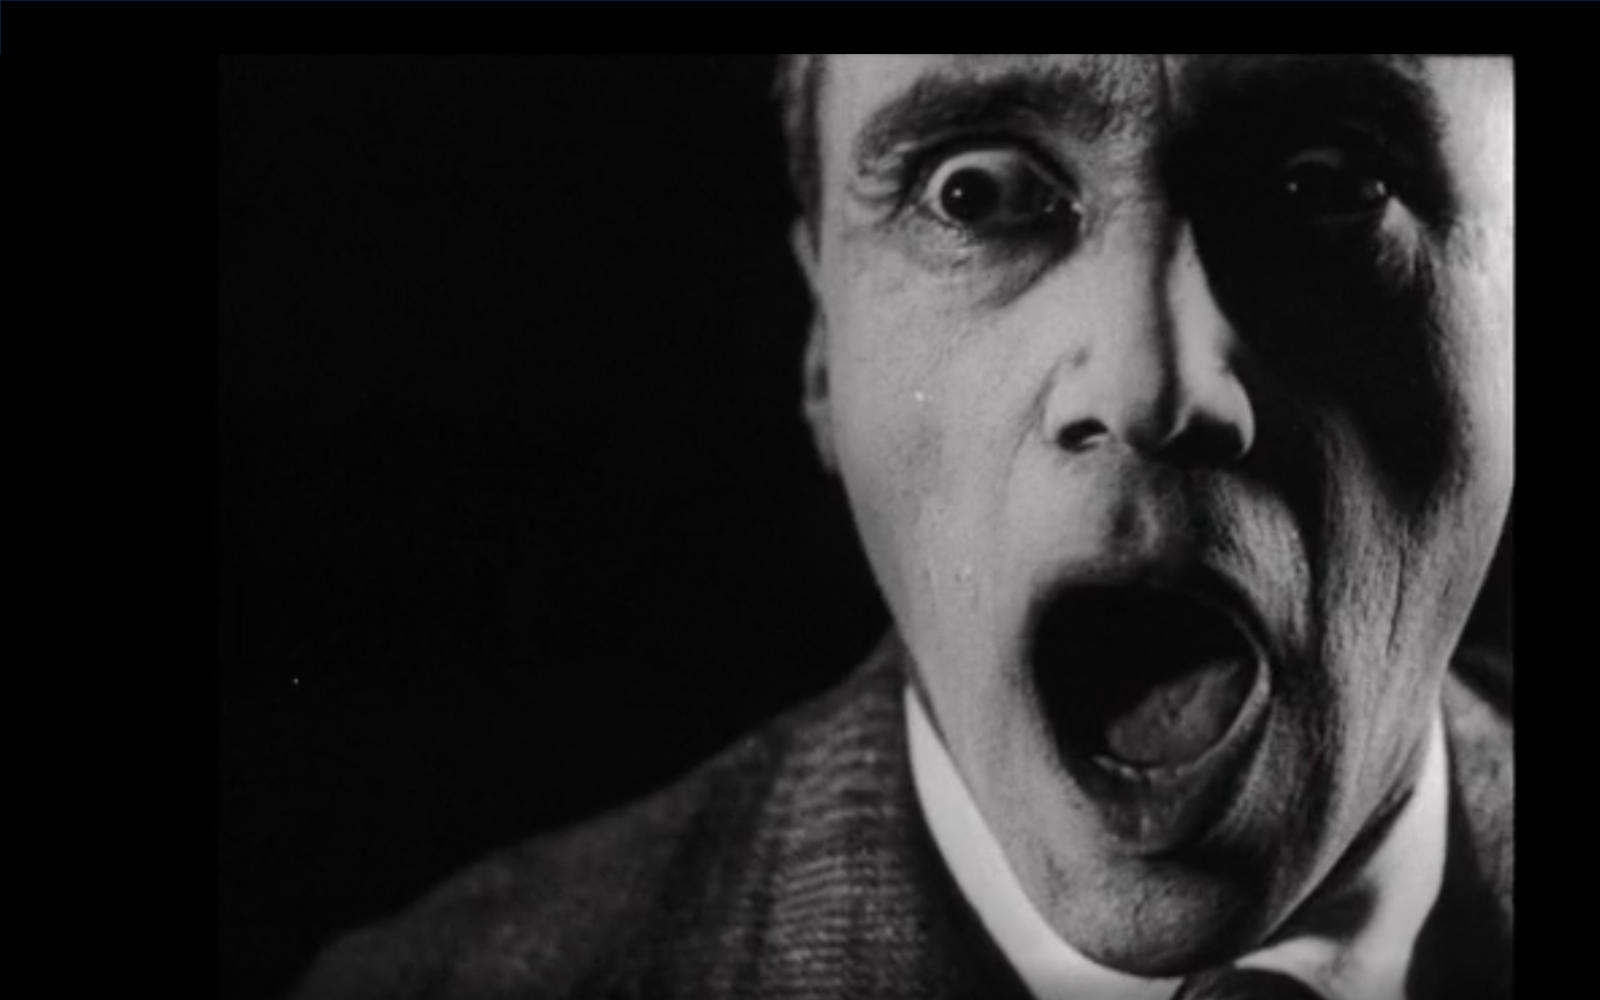 Picture of the film »Alles dreht sich, Alles bewegt sich« from 1929, showing a man with his mouth wide open in black and white.